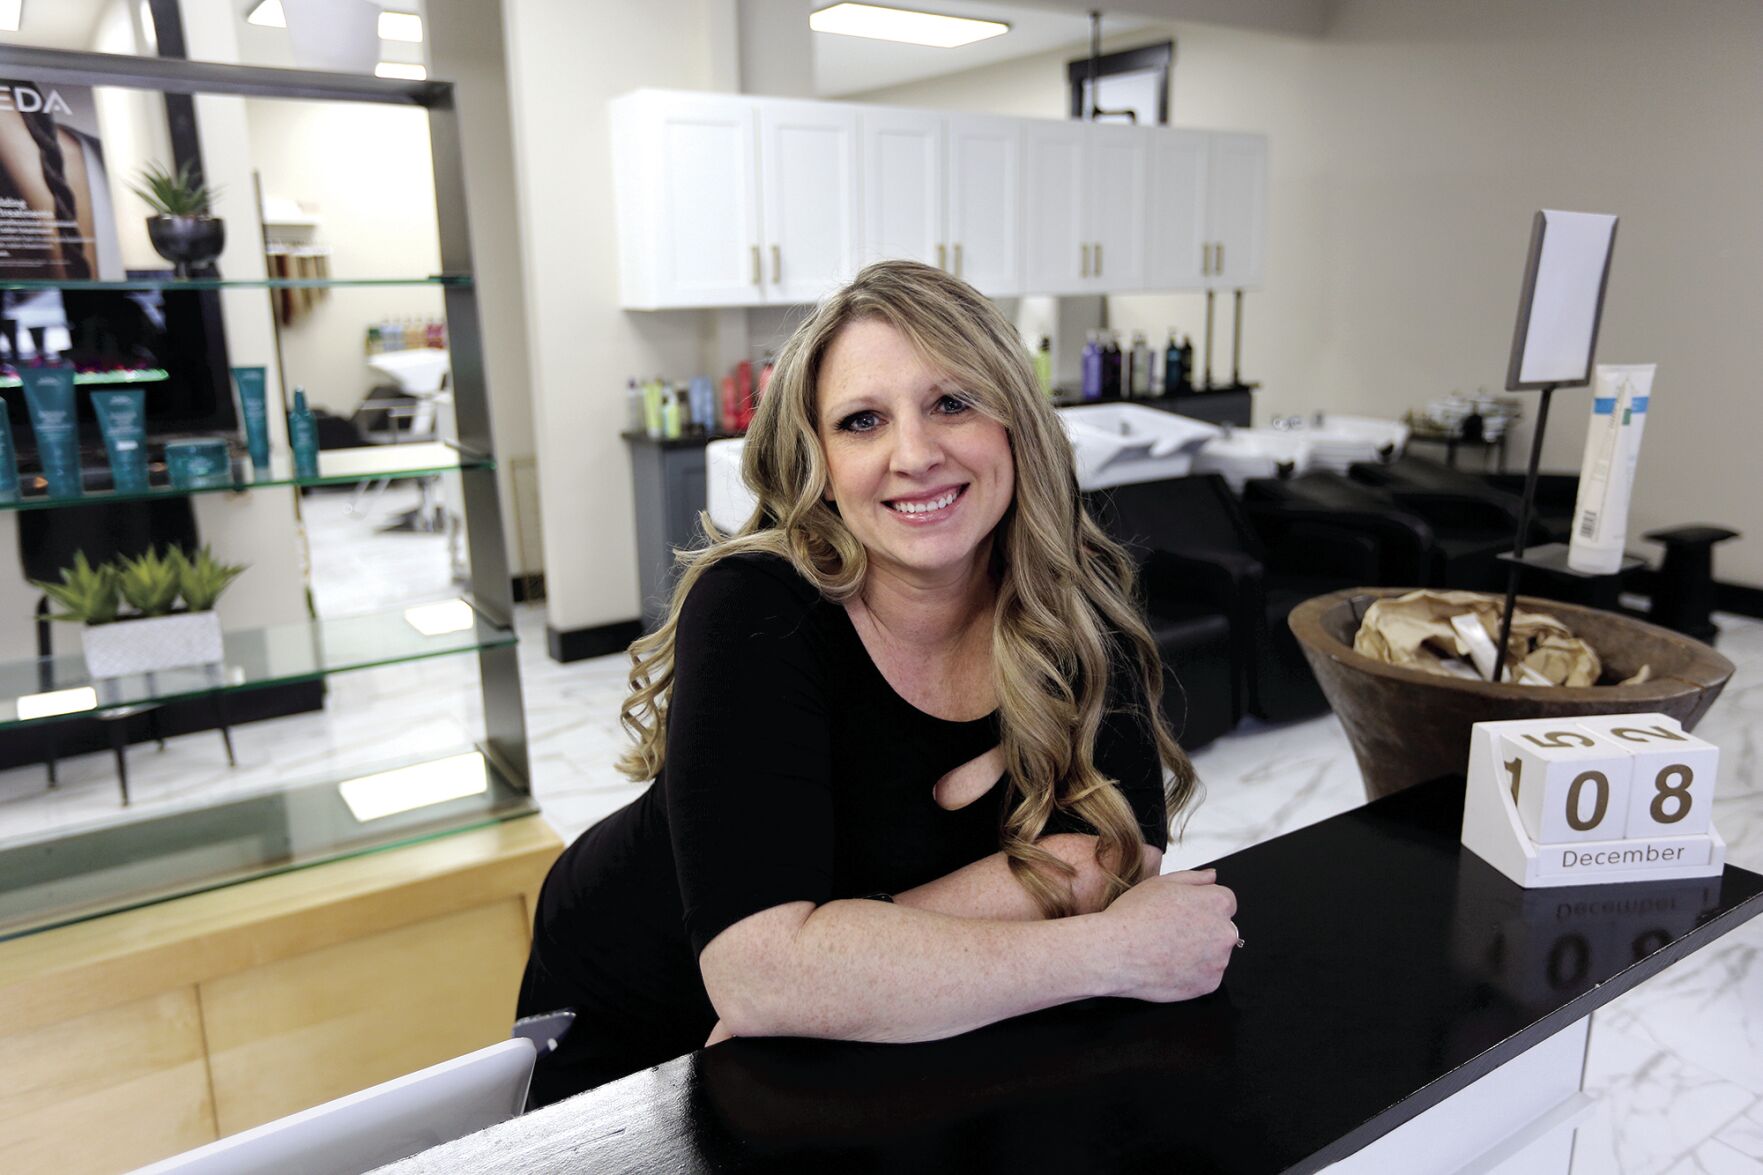 Cortney Herber is the owner of Meraki Salon and Spa and Extension Bar in Dubuque.    PHOTO CREDIT: Dave Kettering